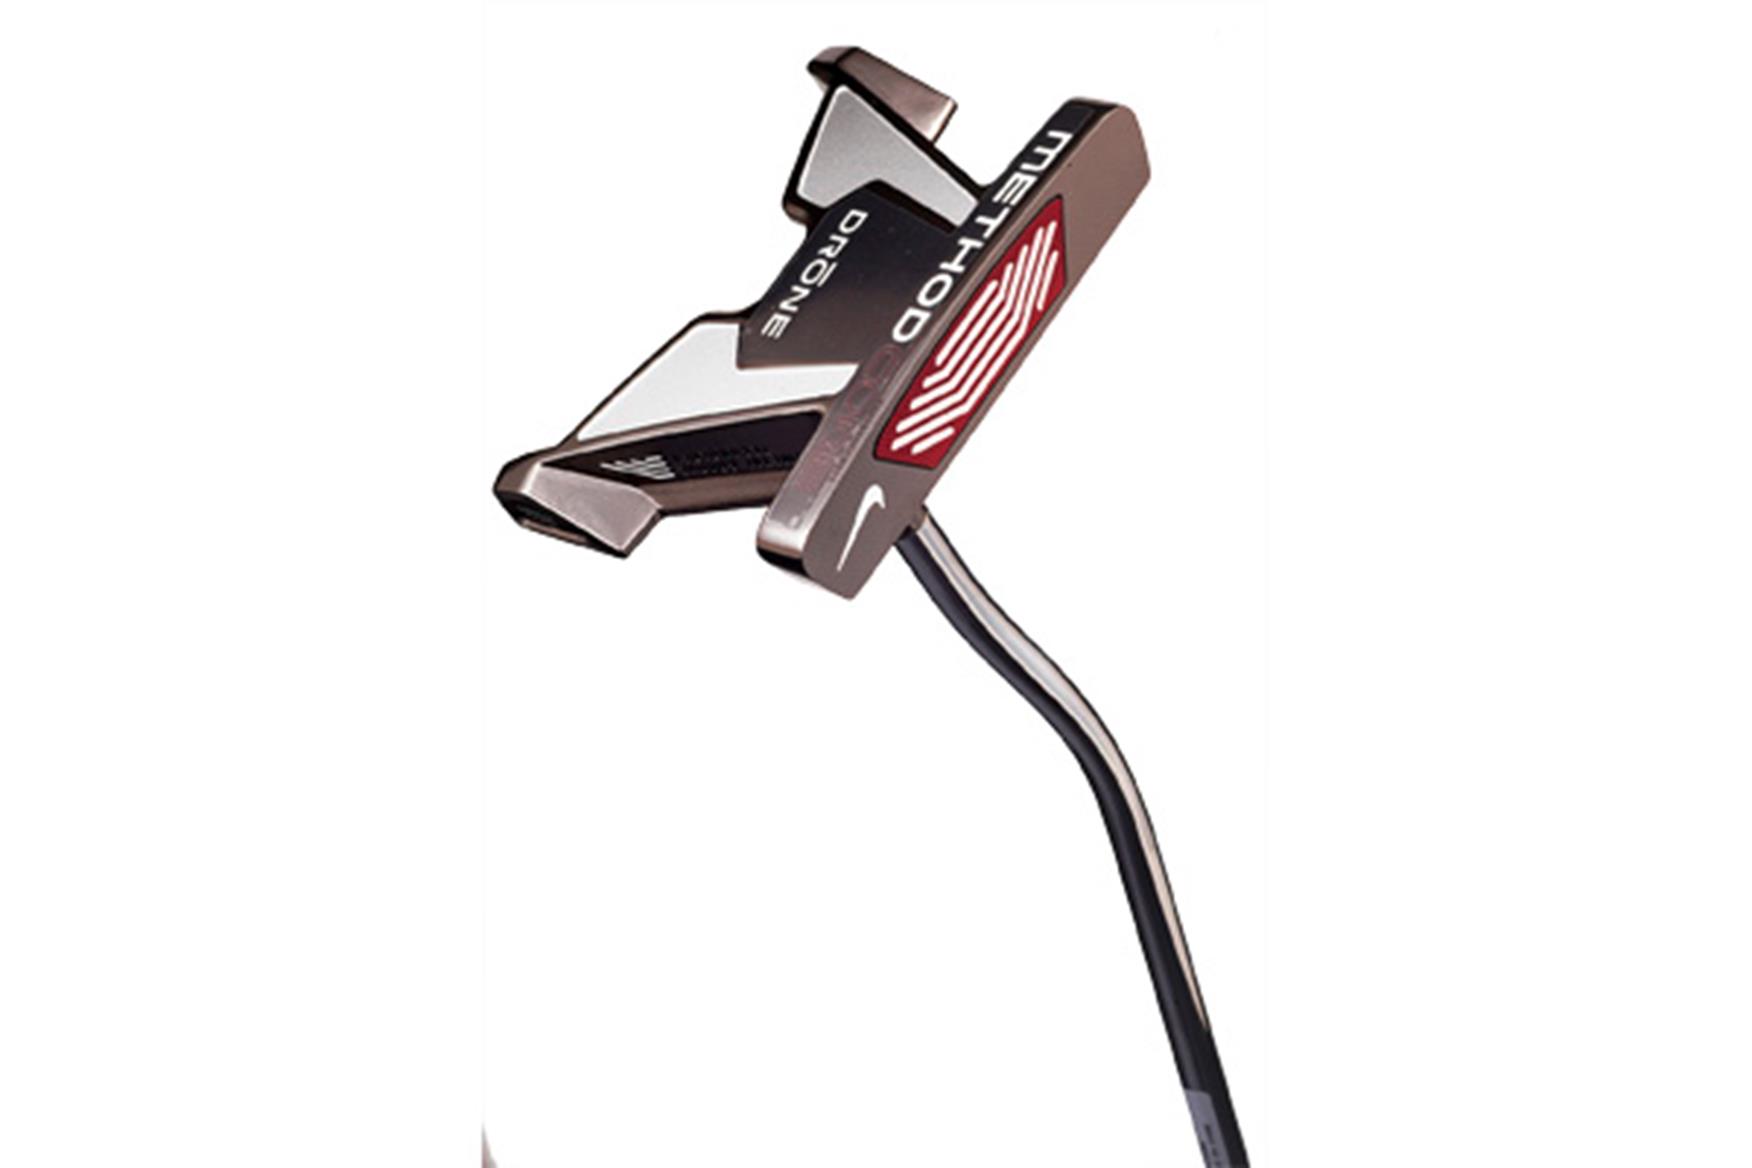 nike method core drone 2.0 putter